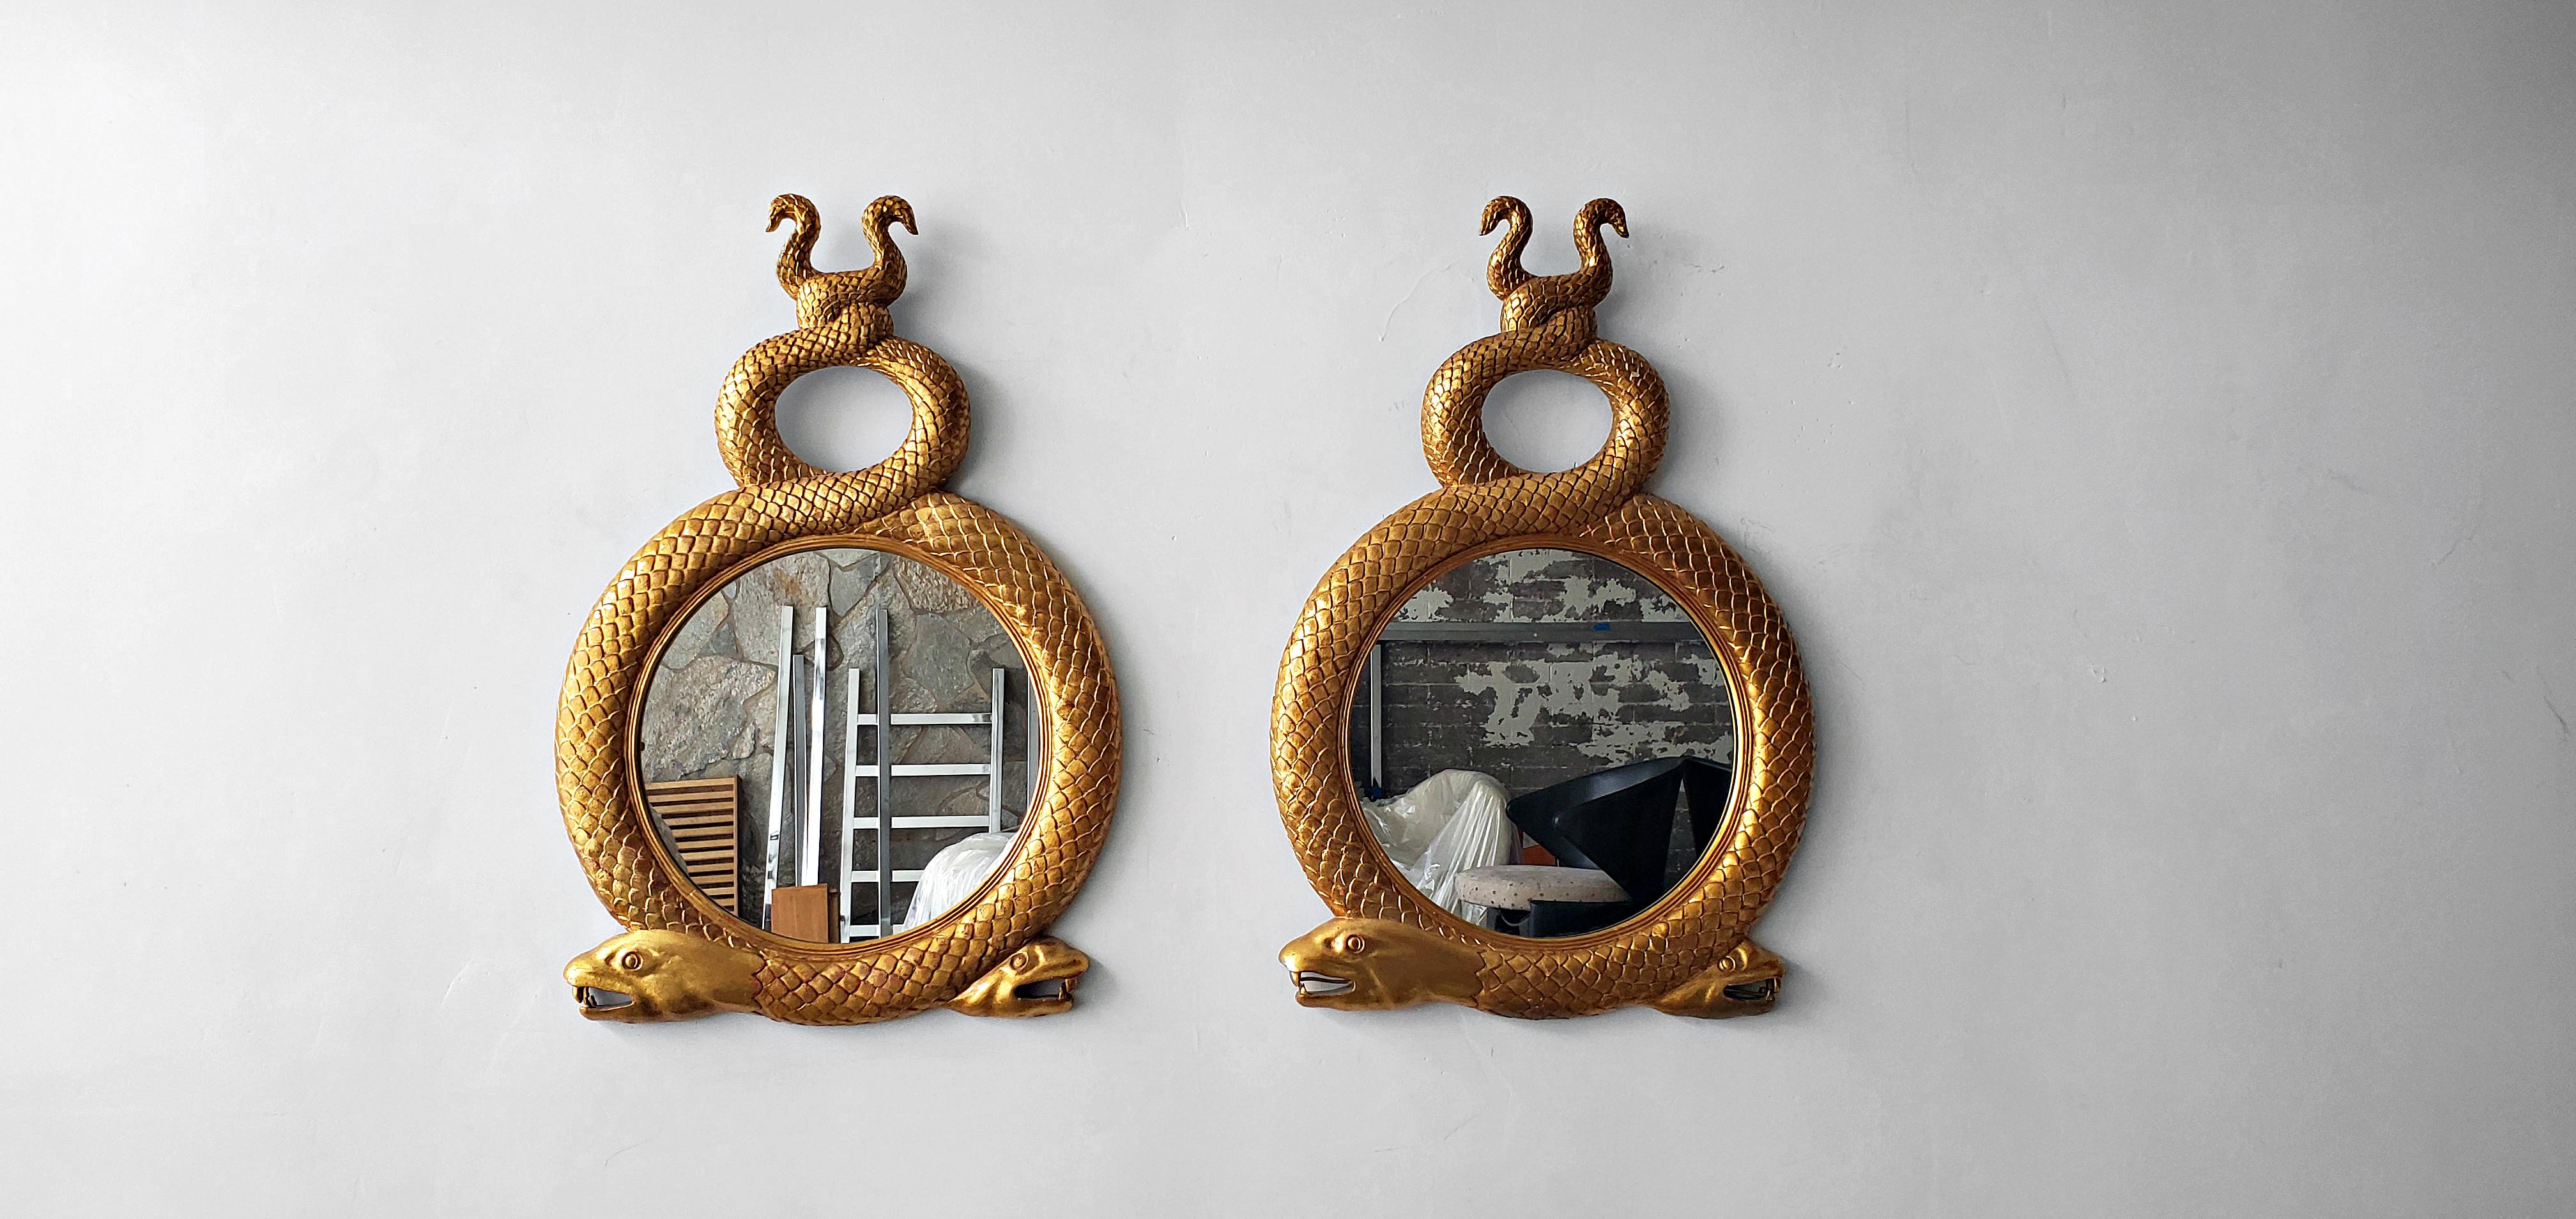 Absolutely stunning pair of vintage carved gilt serpent wall mirrors. A rare find but even rarer to find as a pair. They are carved from solid wood and gilded with amazing details.

Their uses are endless but my dream for the pair is to be used as